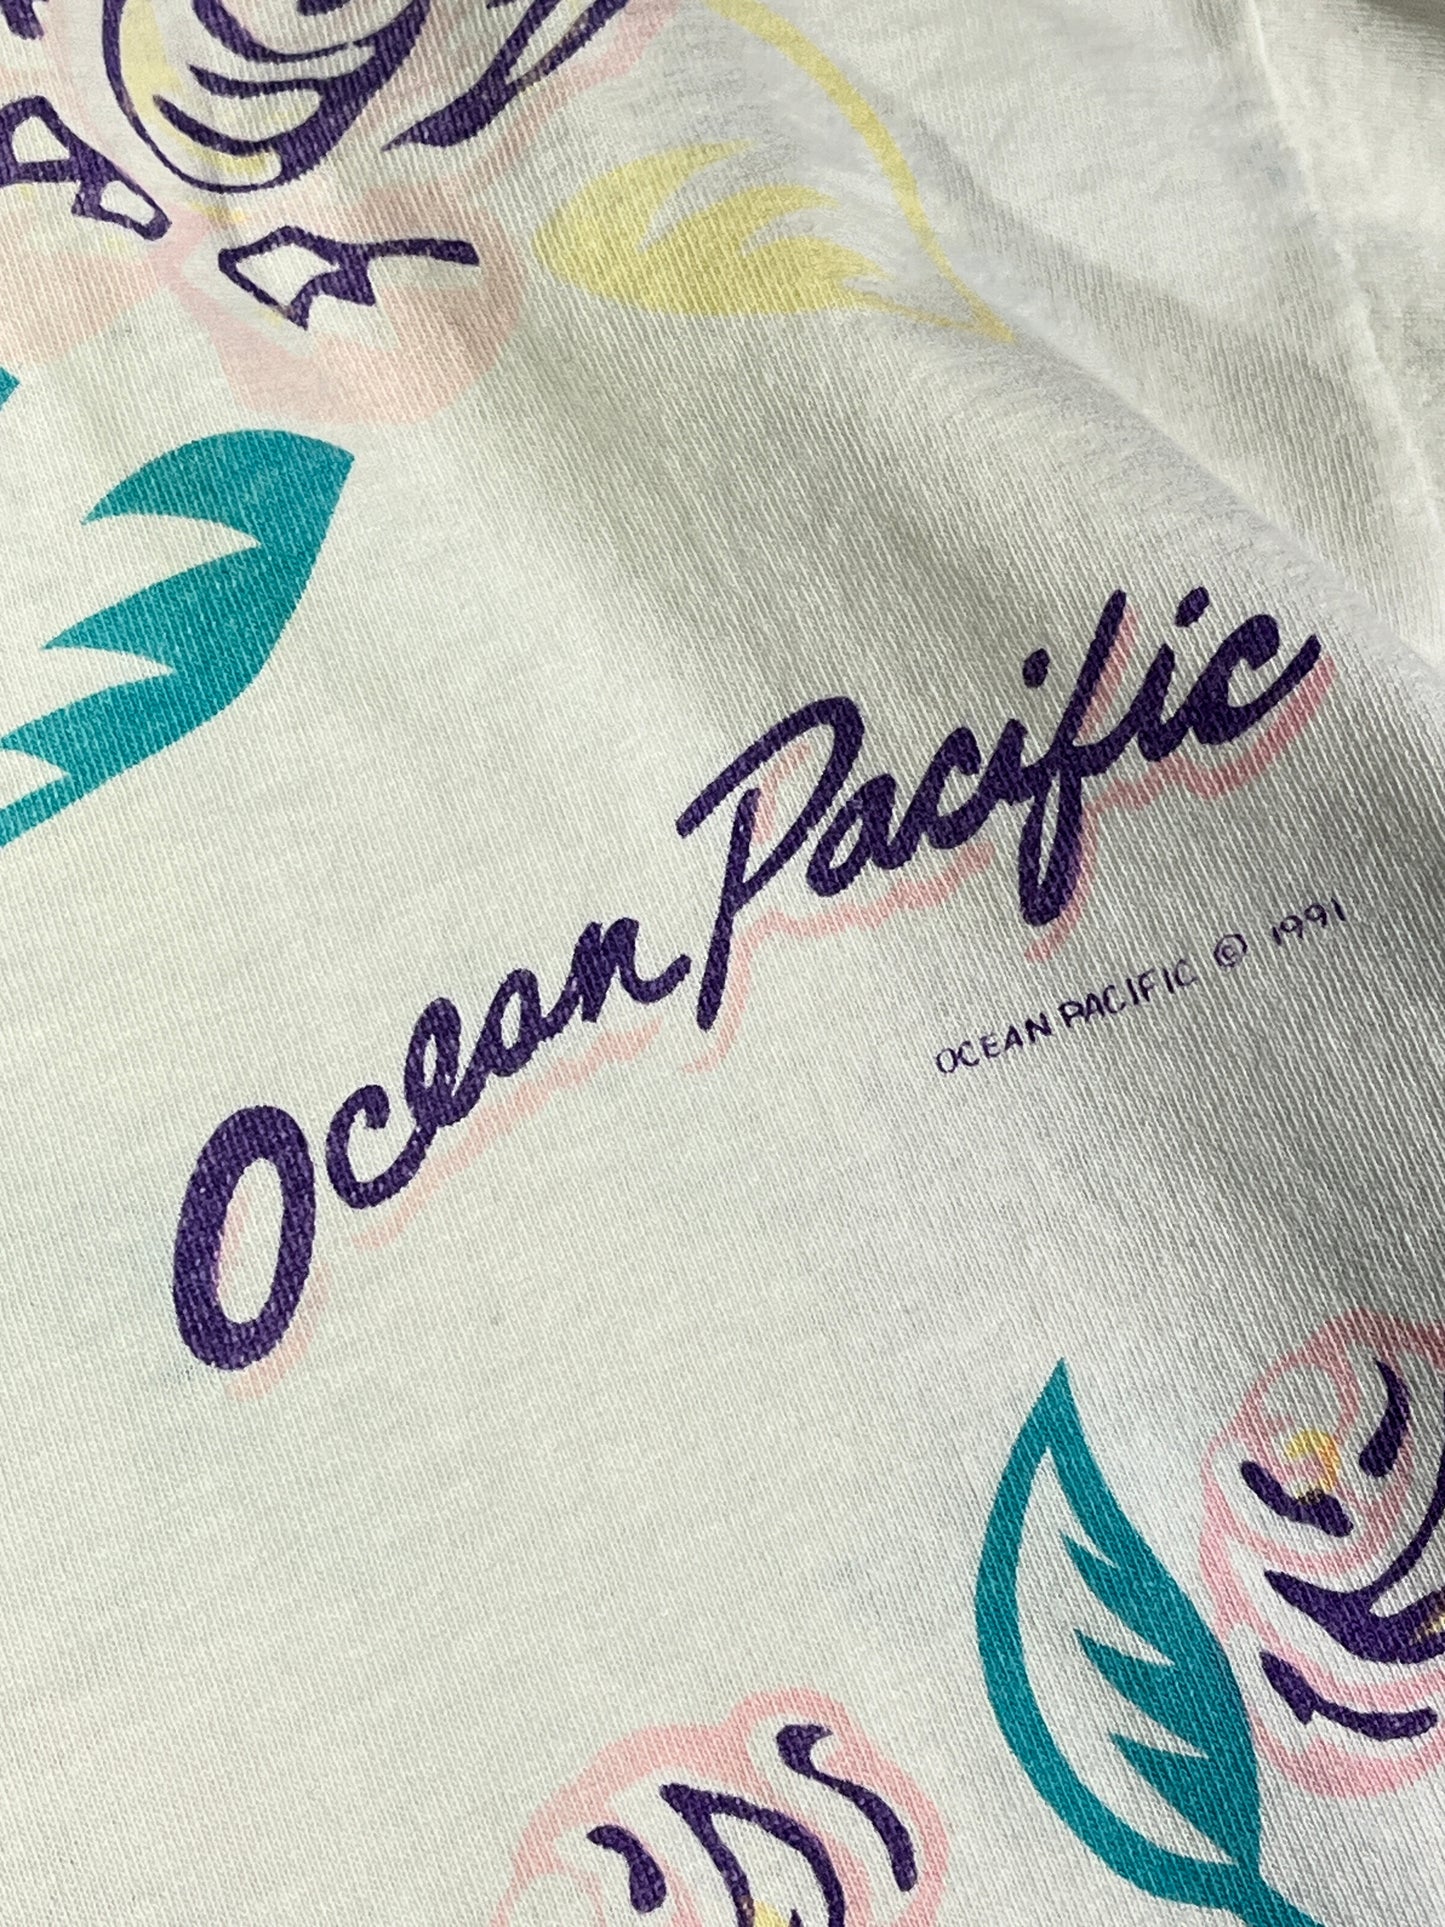 Vintage Ocean Pacific T-Shirt Cropped AND Boxy Fit 90's Floral